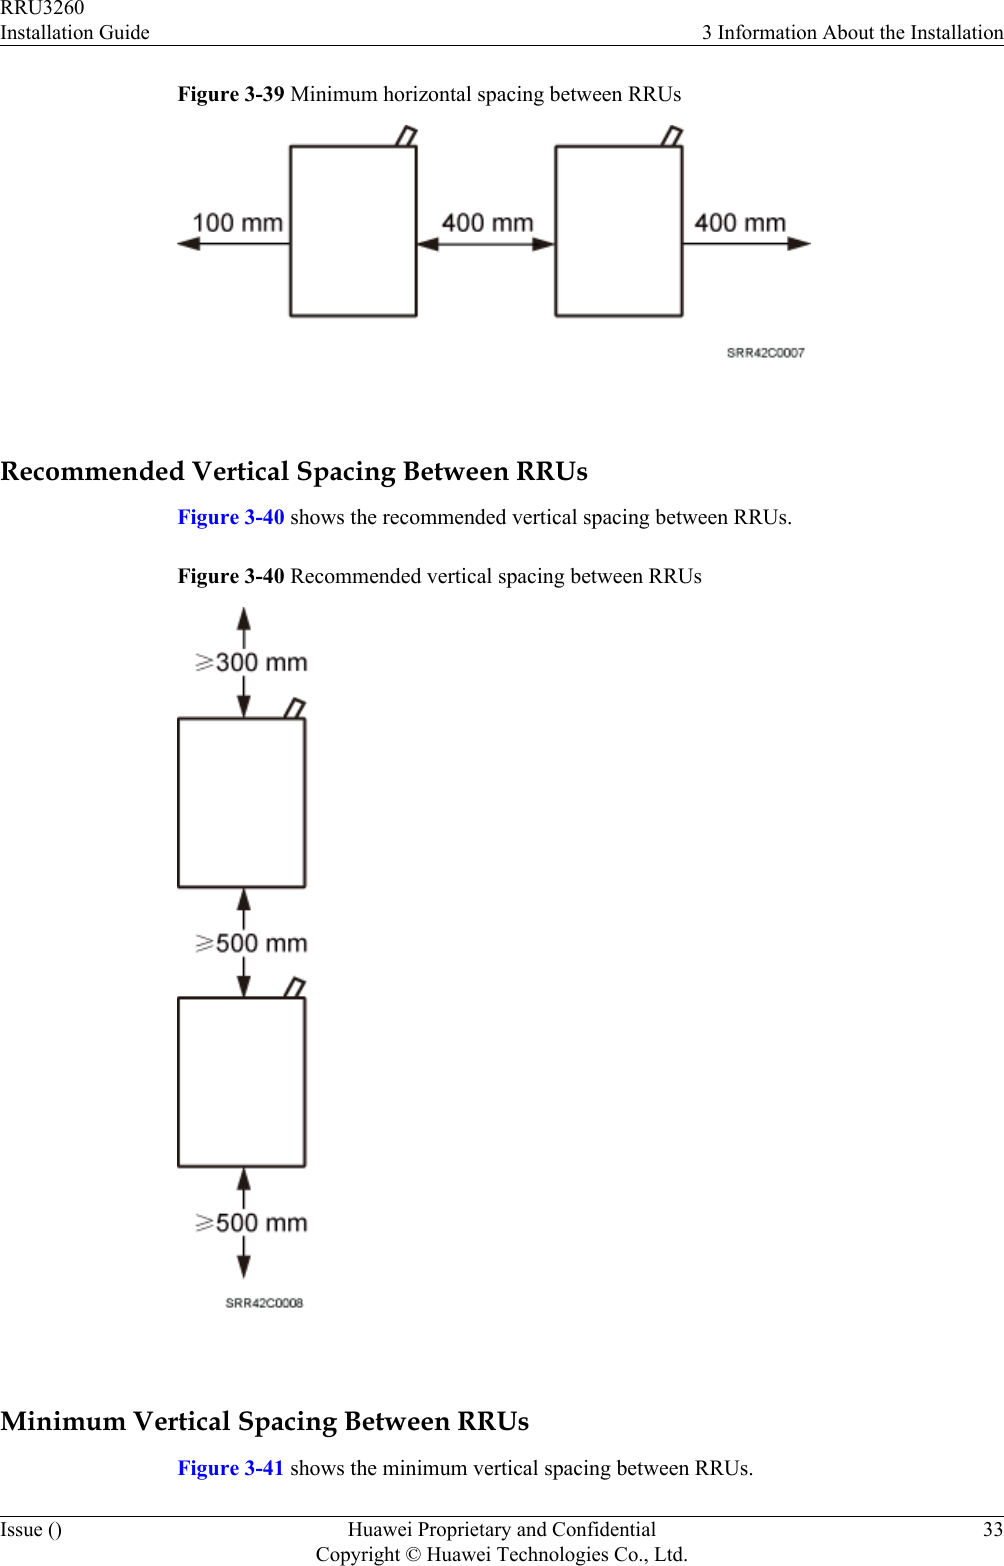 Figure 3-39 Minimum horizontal spacing between RRUs Recommended Vertical Spacing Between RRUsFigure 3-40 shows the recommended vertical spacing between RRUs.Figure 3-40 Recommended vertical spacing between RRUs Minimum Vertical Spacing Between RRUsFigure 3-41 shows the minimum vertical spacing between RRUs.RRU3260Installation Guide 3 Information About the InstallationIssue () Huawei Proprietary and ConfidentialCopyright © Huawei Technologies Co., Ltd.33